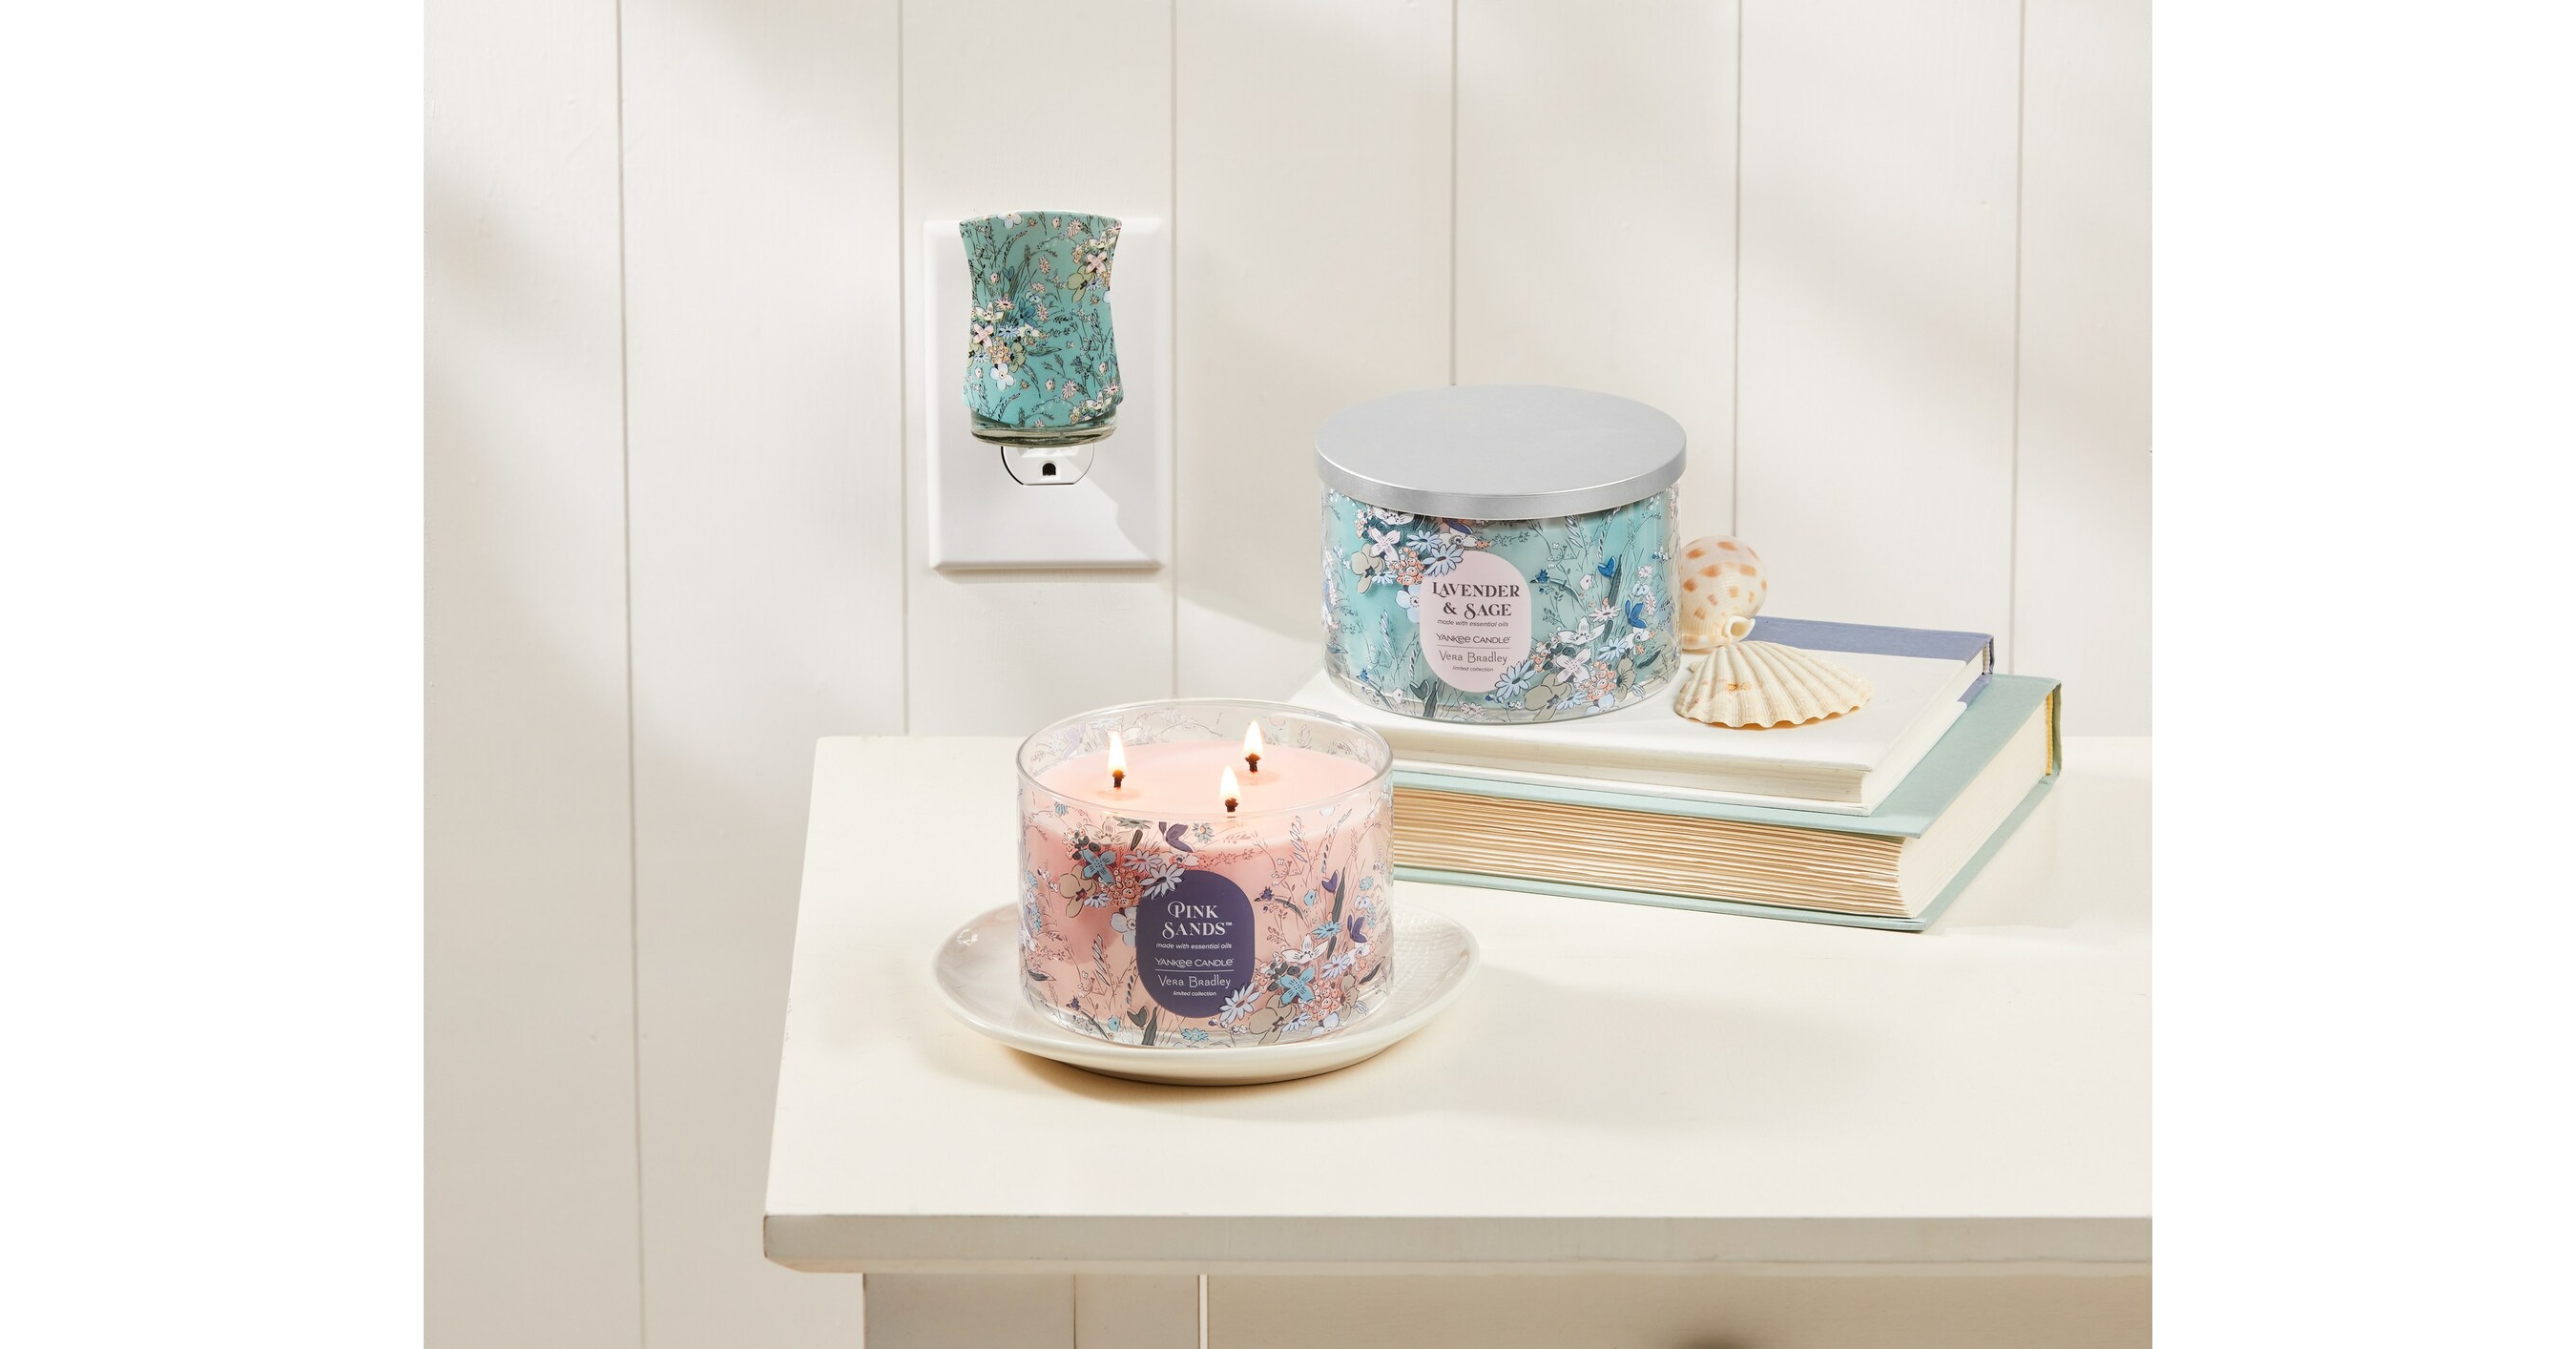 Yankee Candle unveils new 'Signature Collection' that includes 10